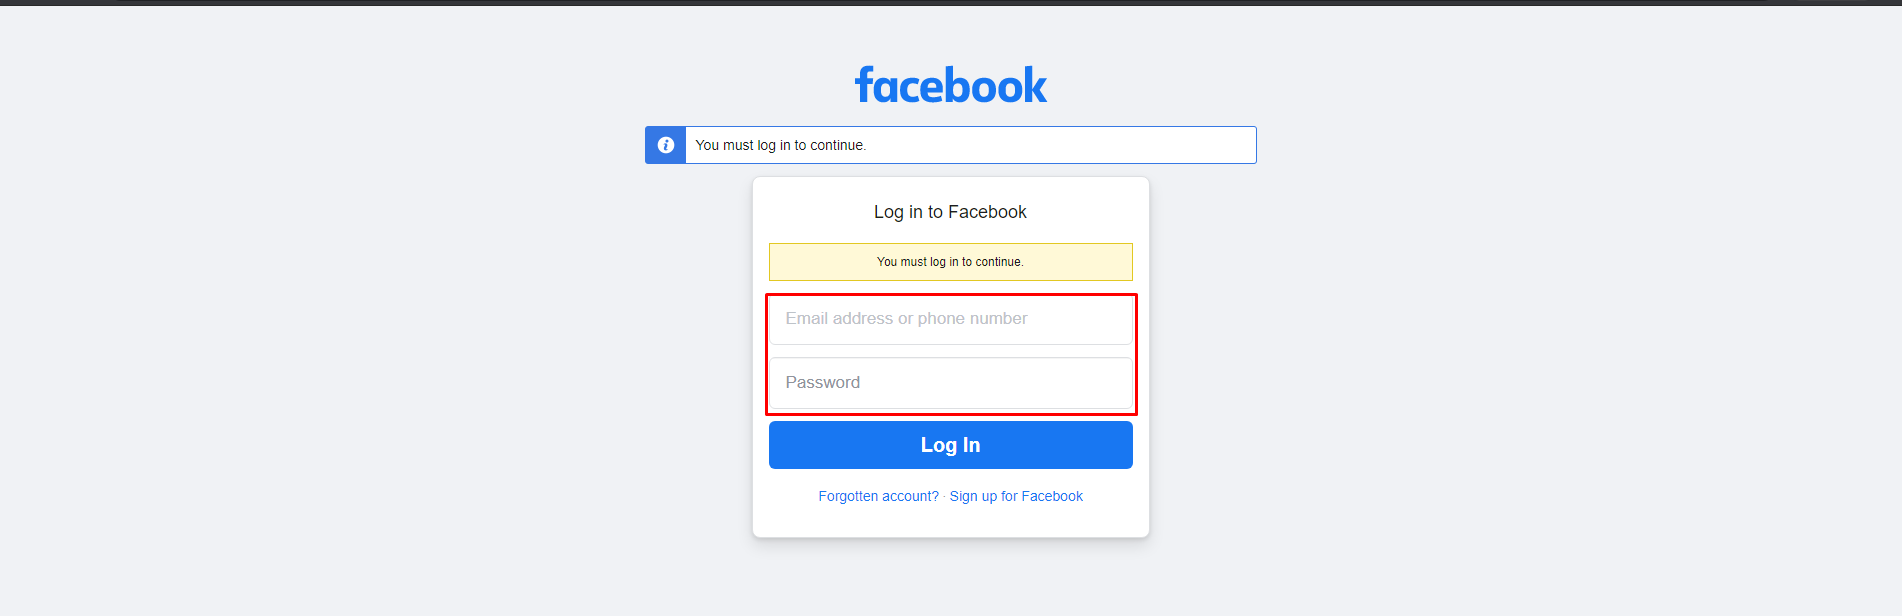 Create Facebook App and get APP ID for Facebook login - SeventhQueen  Archived Support